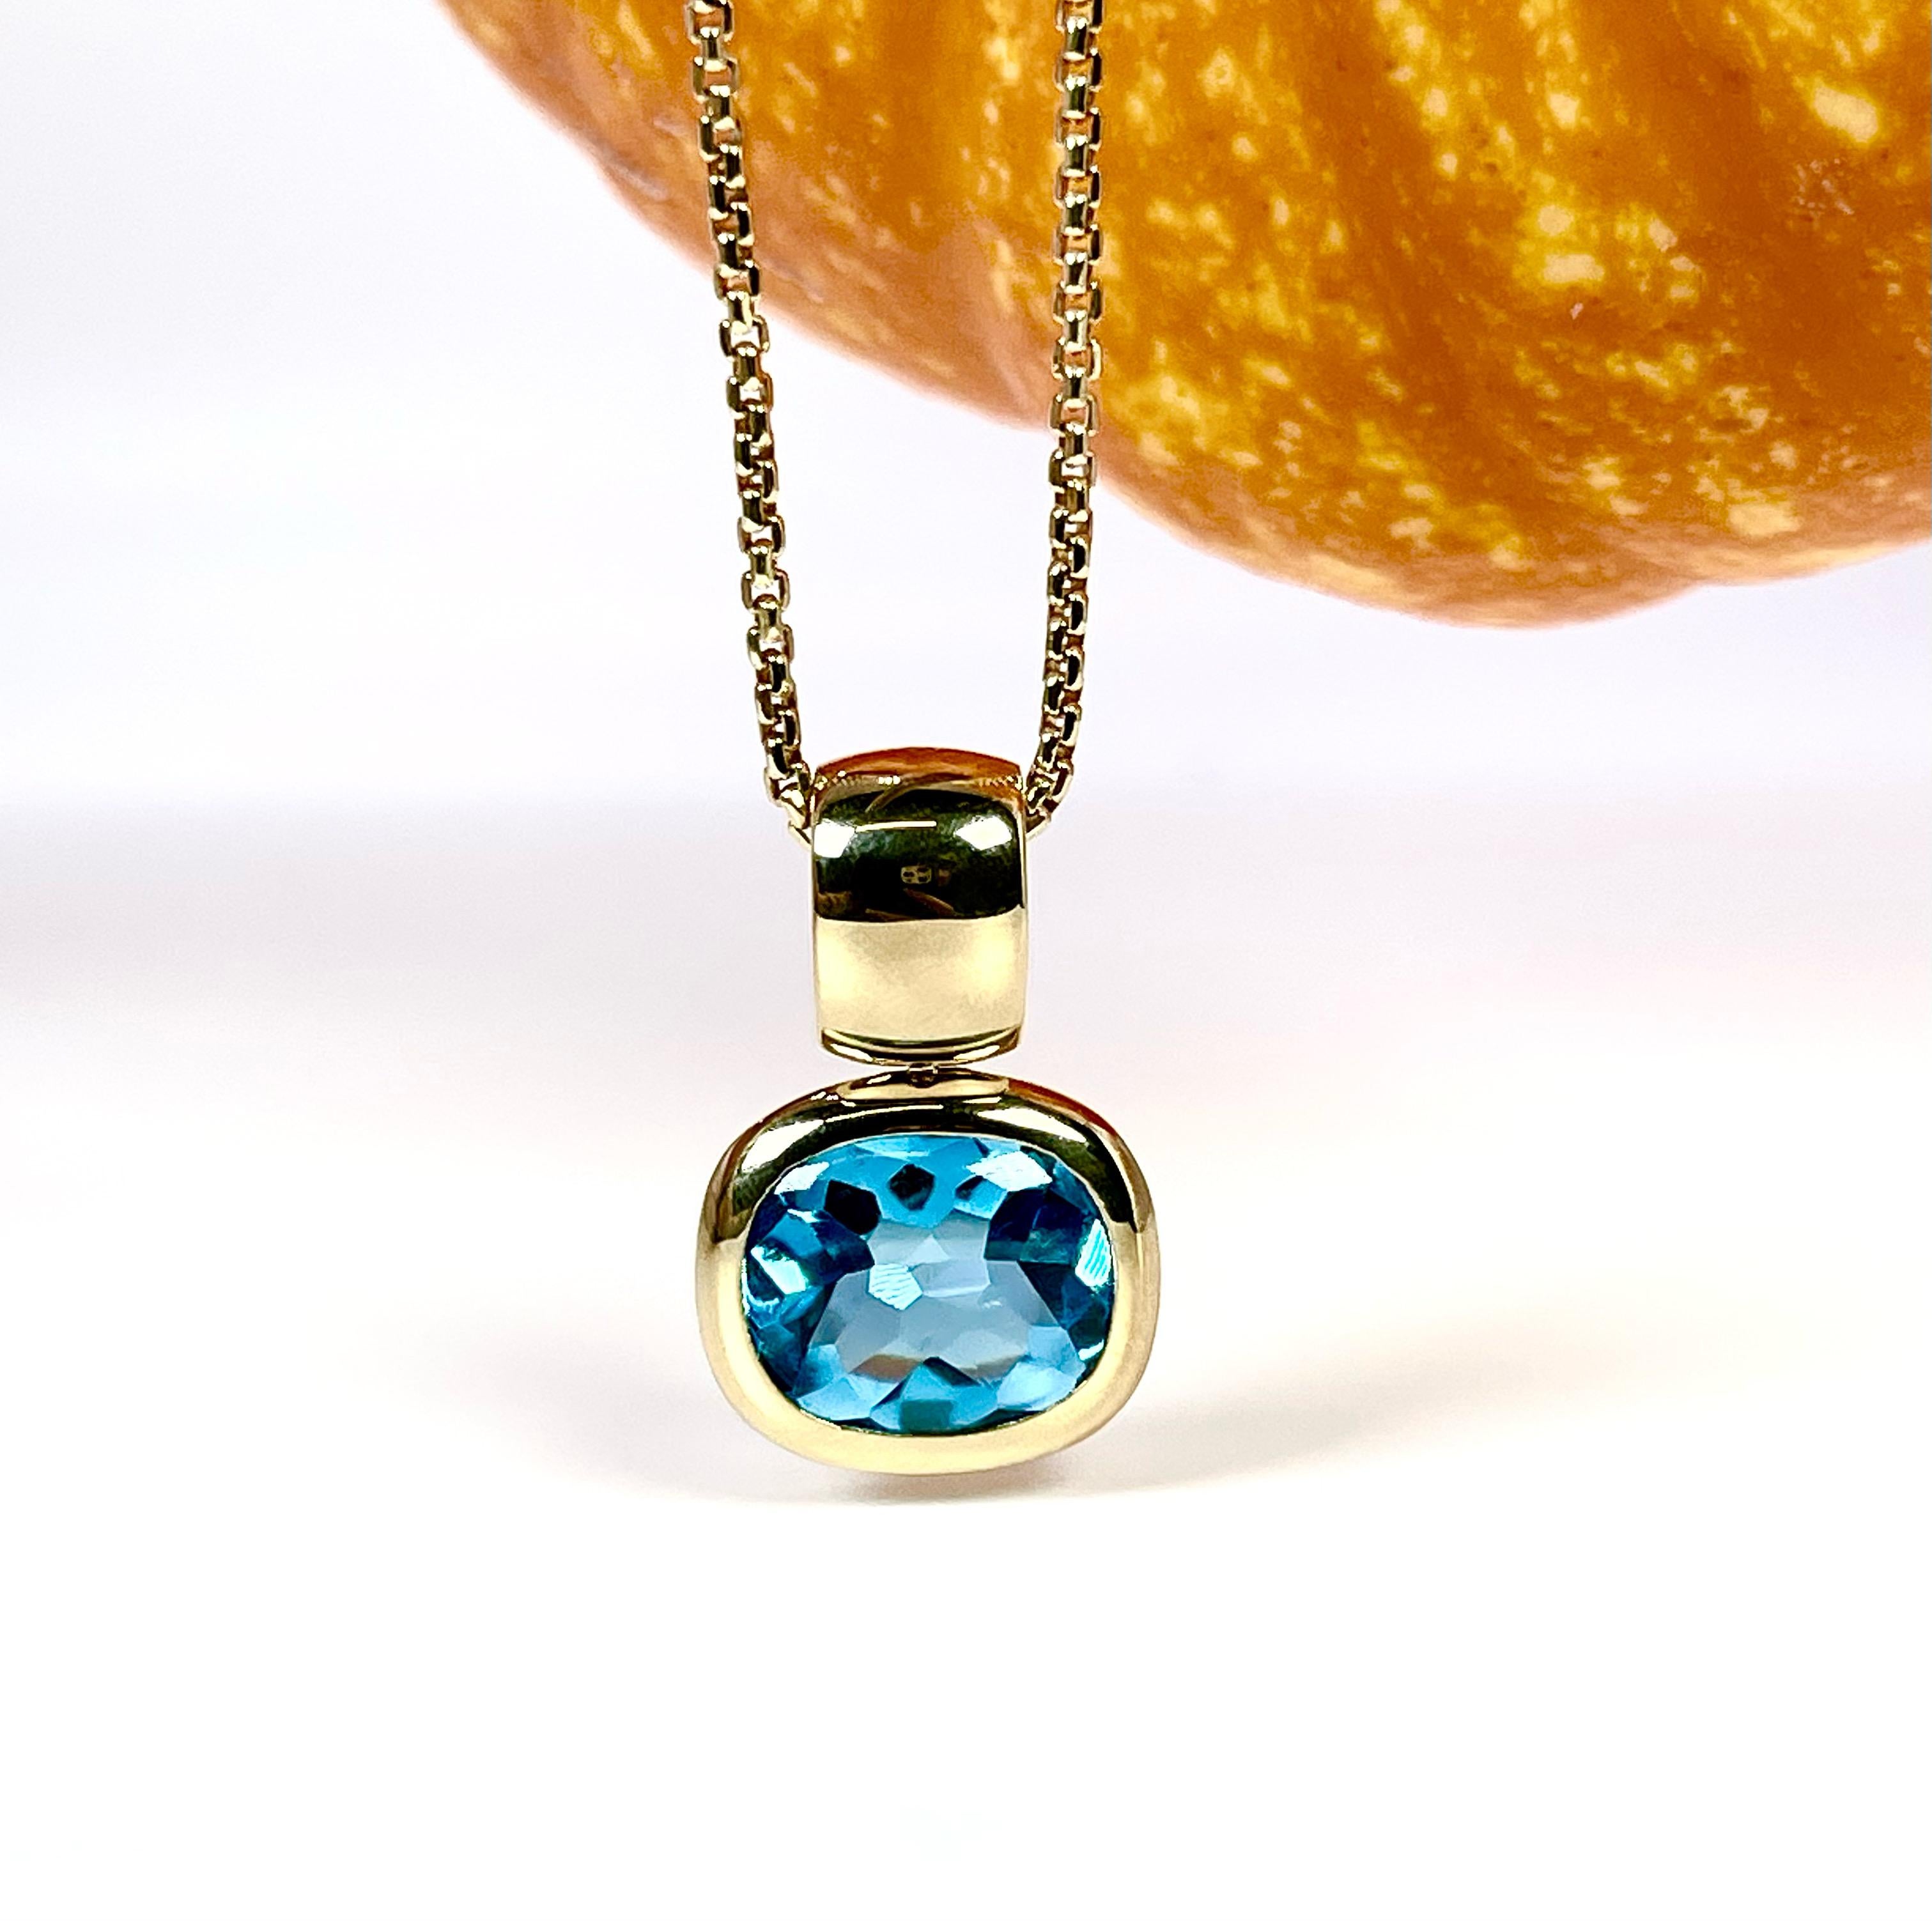 Swiss Blue Topaz Pendant Necklace 18KT Yellow Gold H. Stern 2